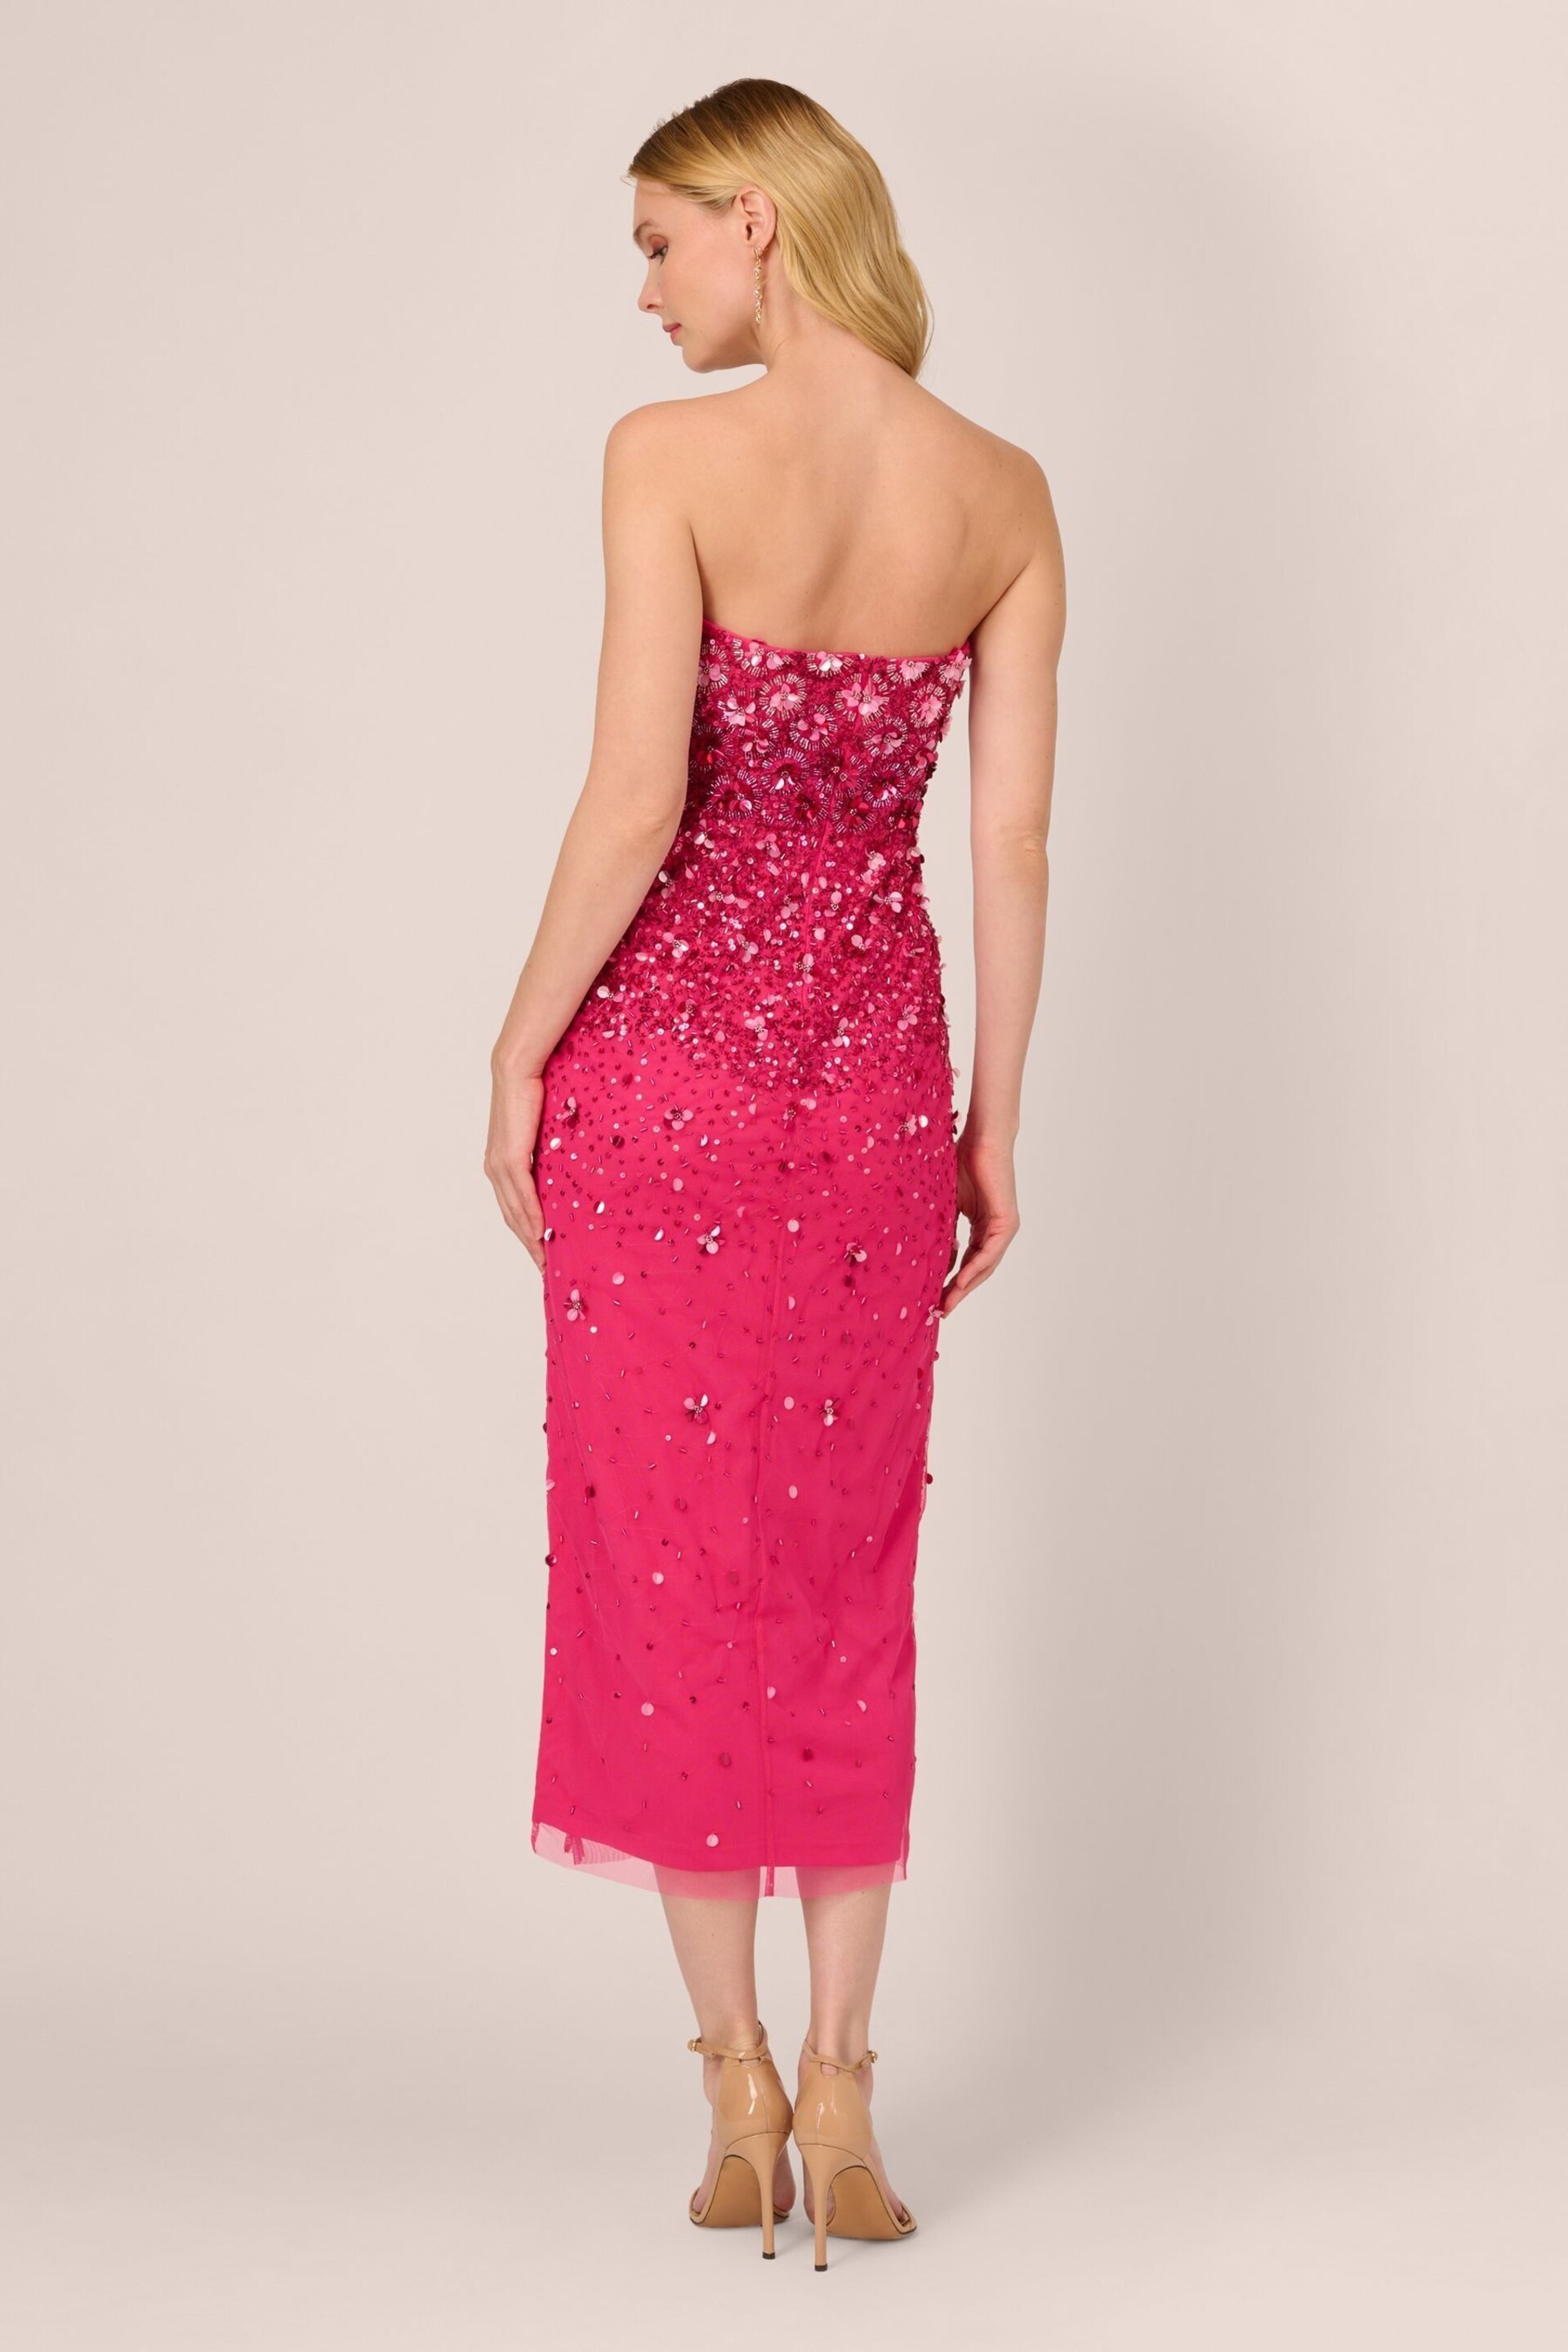 Adrianna Papell Pink Beaded Strapless Dress - Image 2 of 7